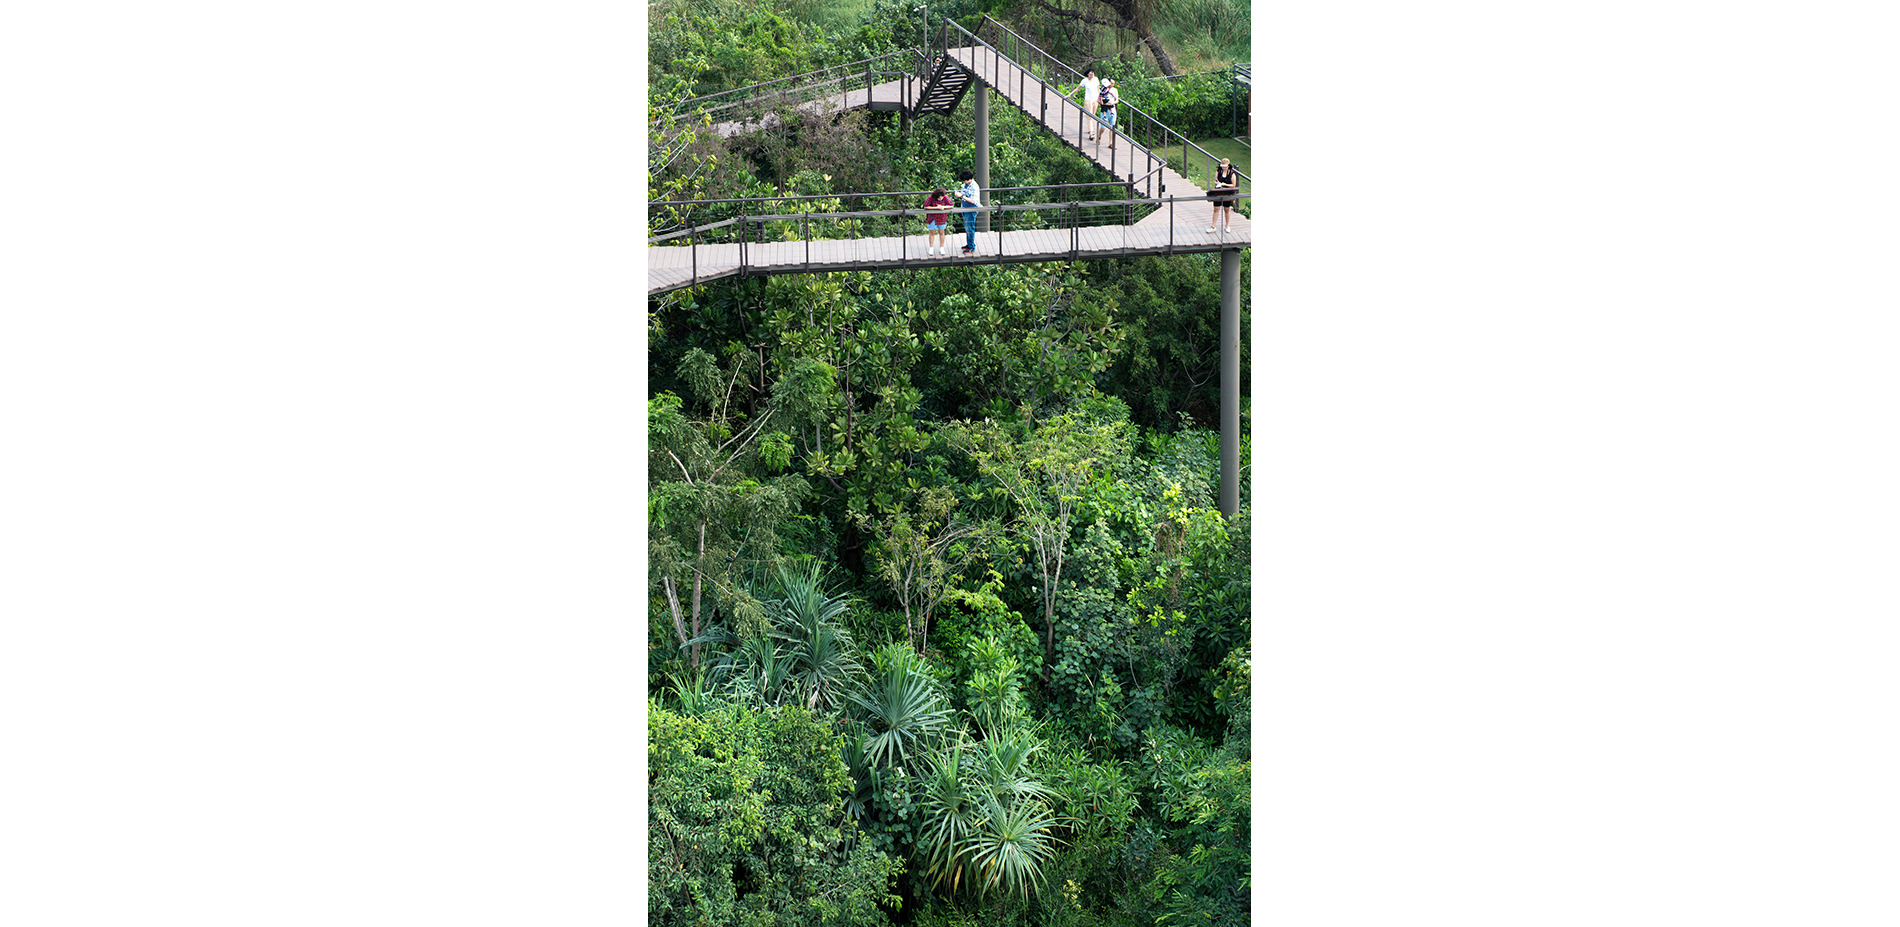 Visitors on Walkway Above the Tree Canopy